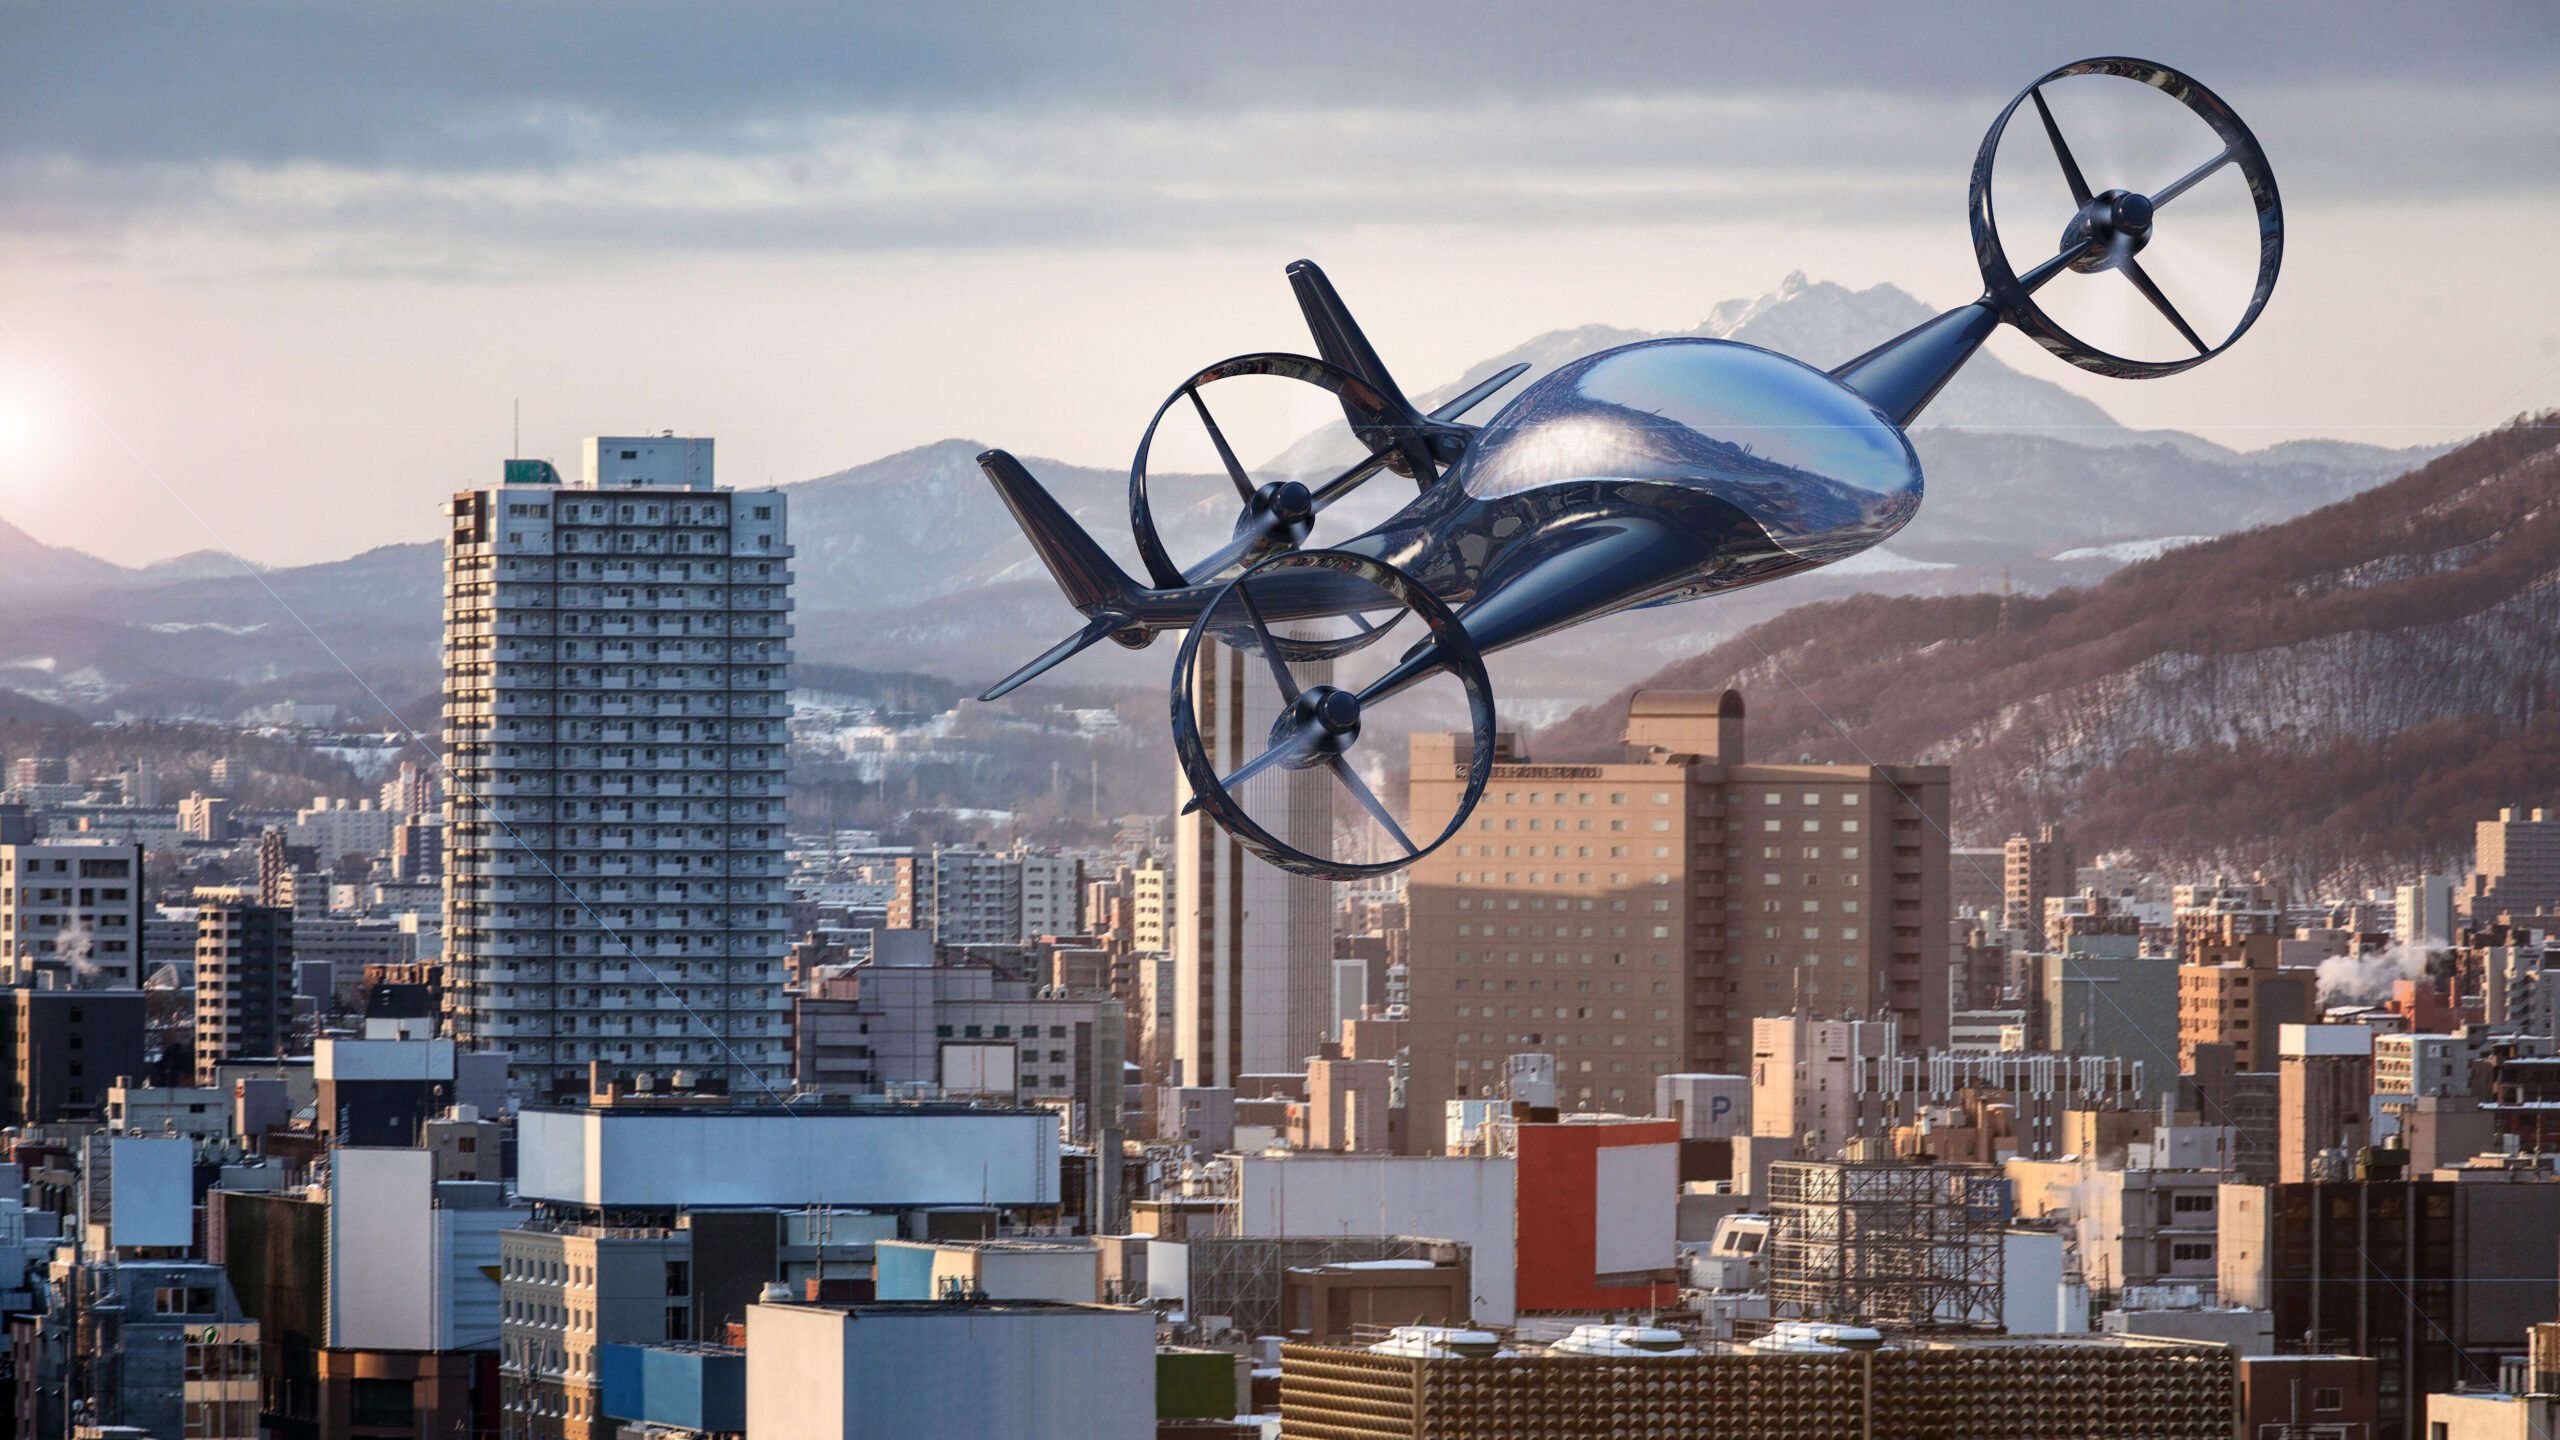 Personal Air Vehicle Flying Above The Cityscape, Flying Car Of The Future 3d Concept, Futuristic Vehicle In The City, Air Car Concept - 3D Rendering